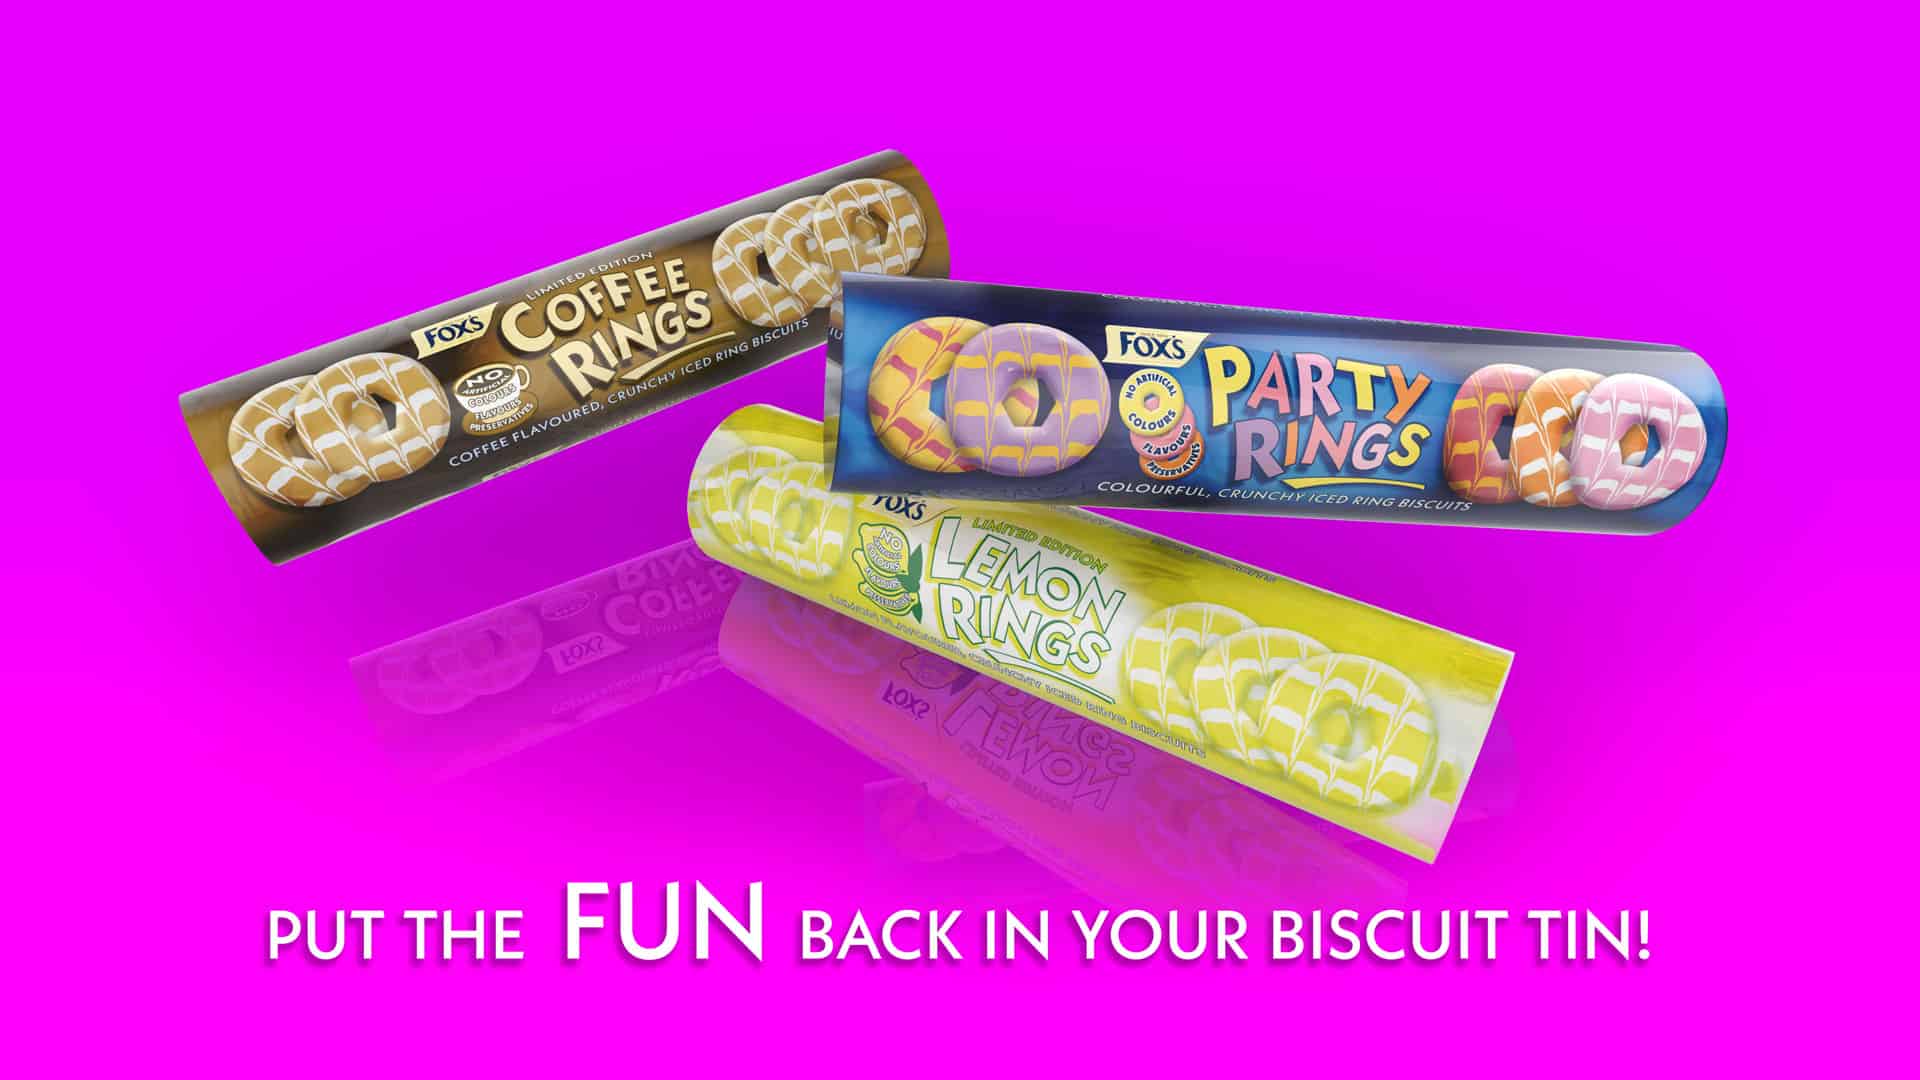 Fox's Biscuits packaging, Party Rings image 2